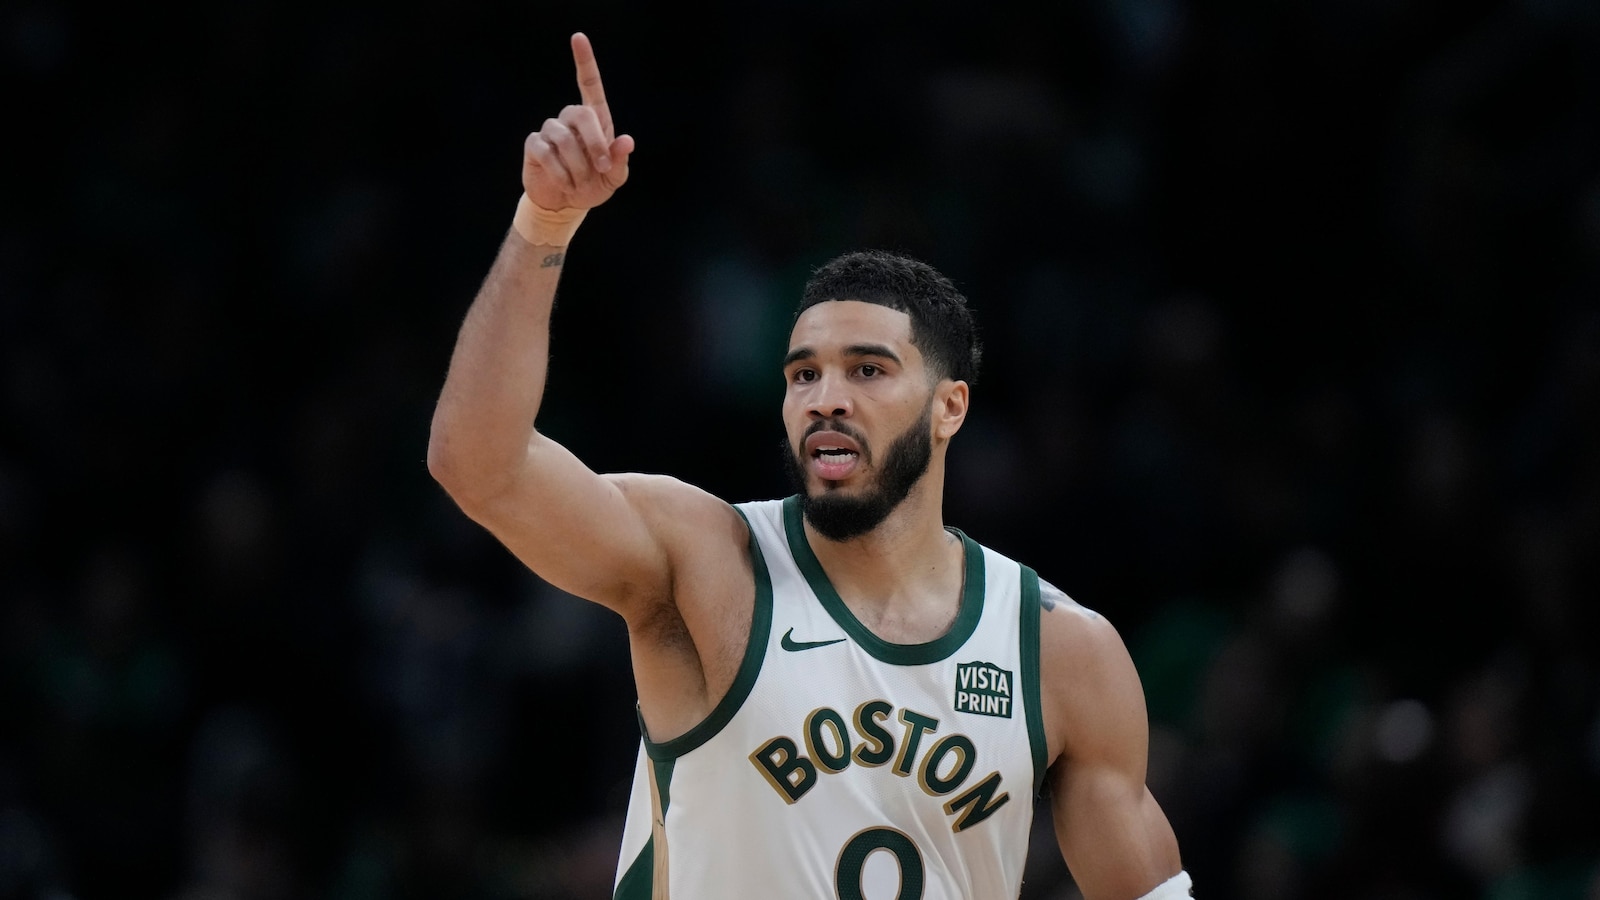 SoFi donates $1M to Celtics star Tatum to assist St. Louis residents in purchasing homes